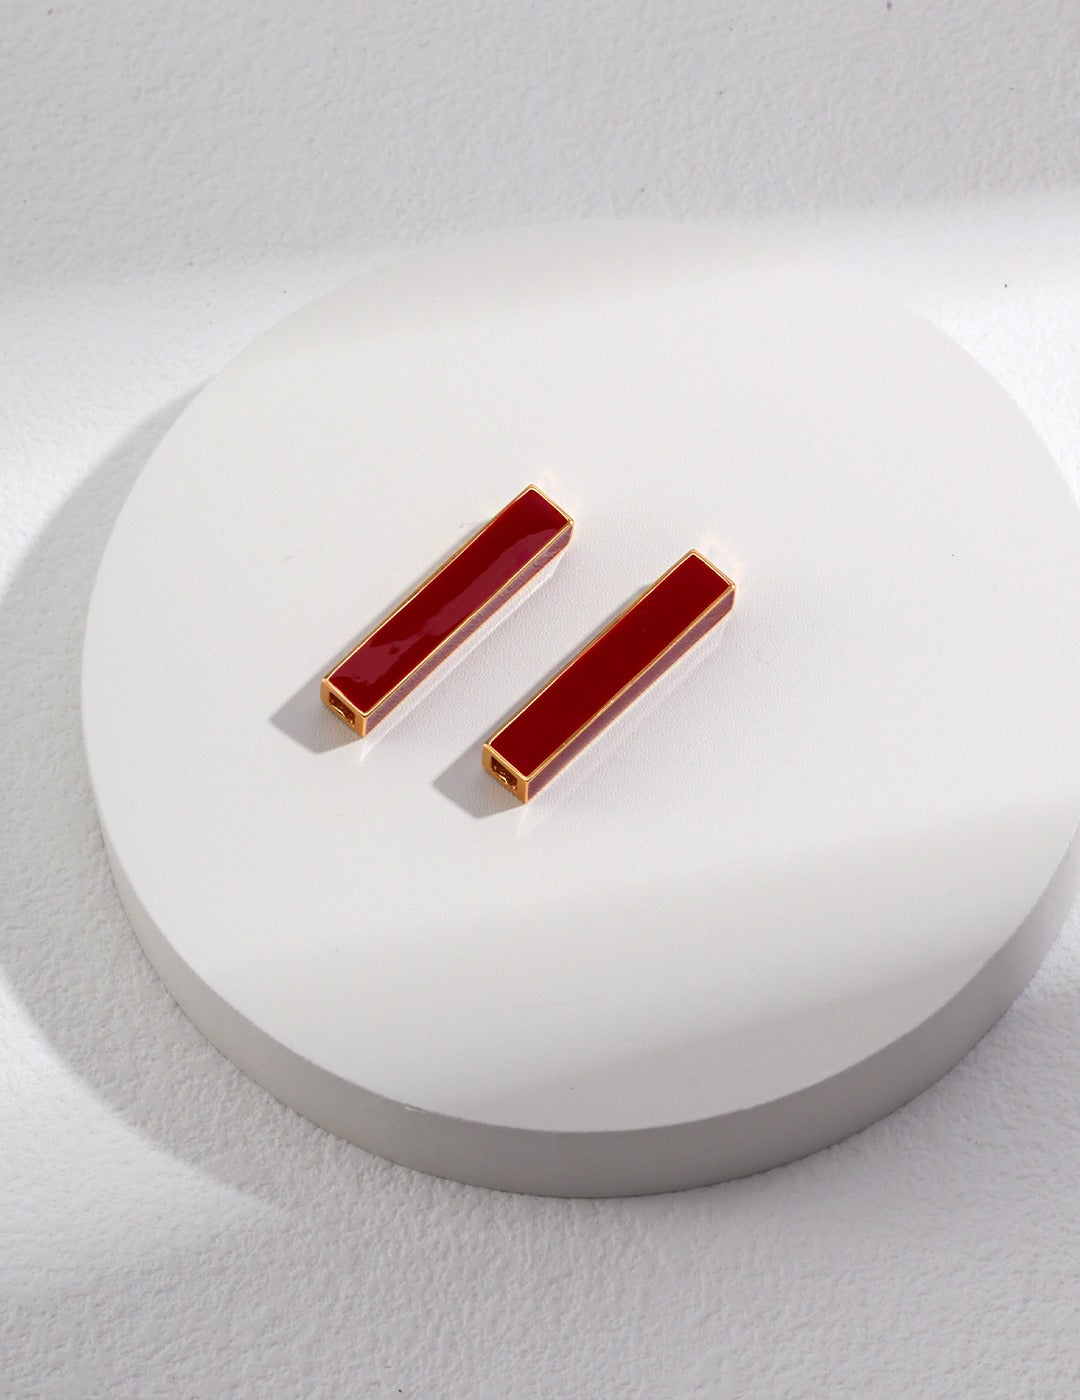 Vintage-inspired minimalist gold earrings with red glaze